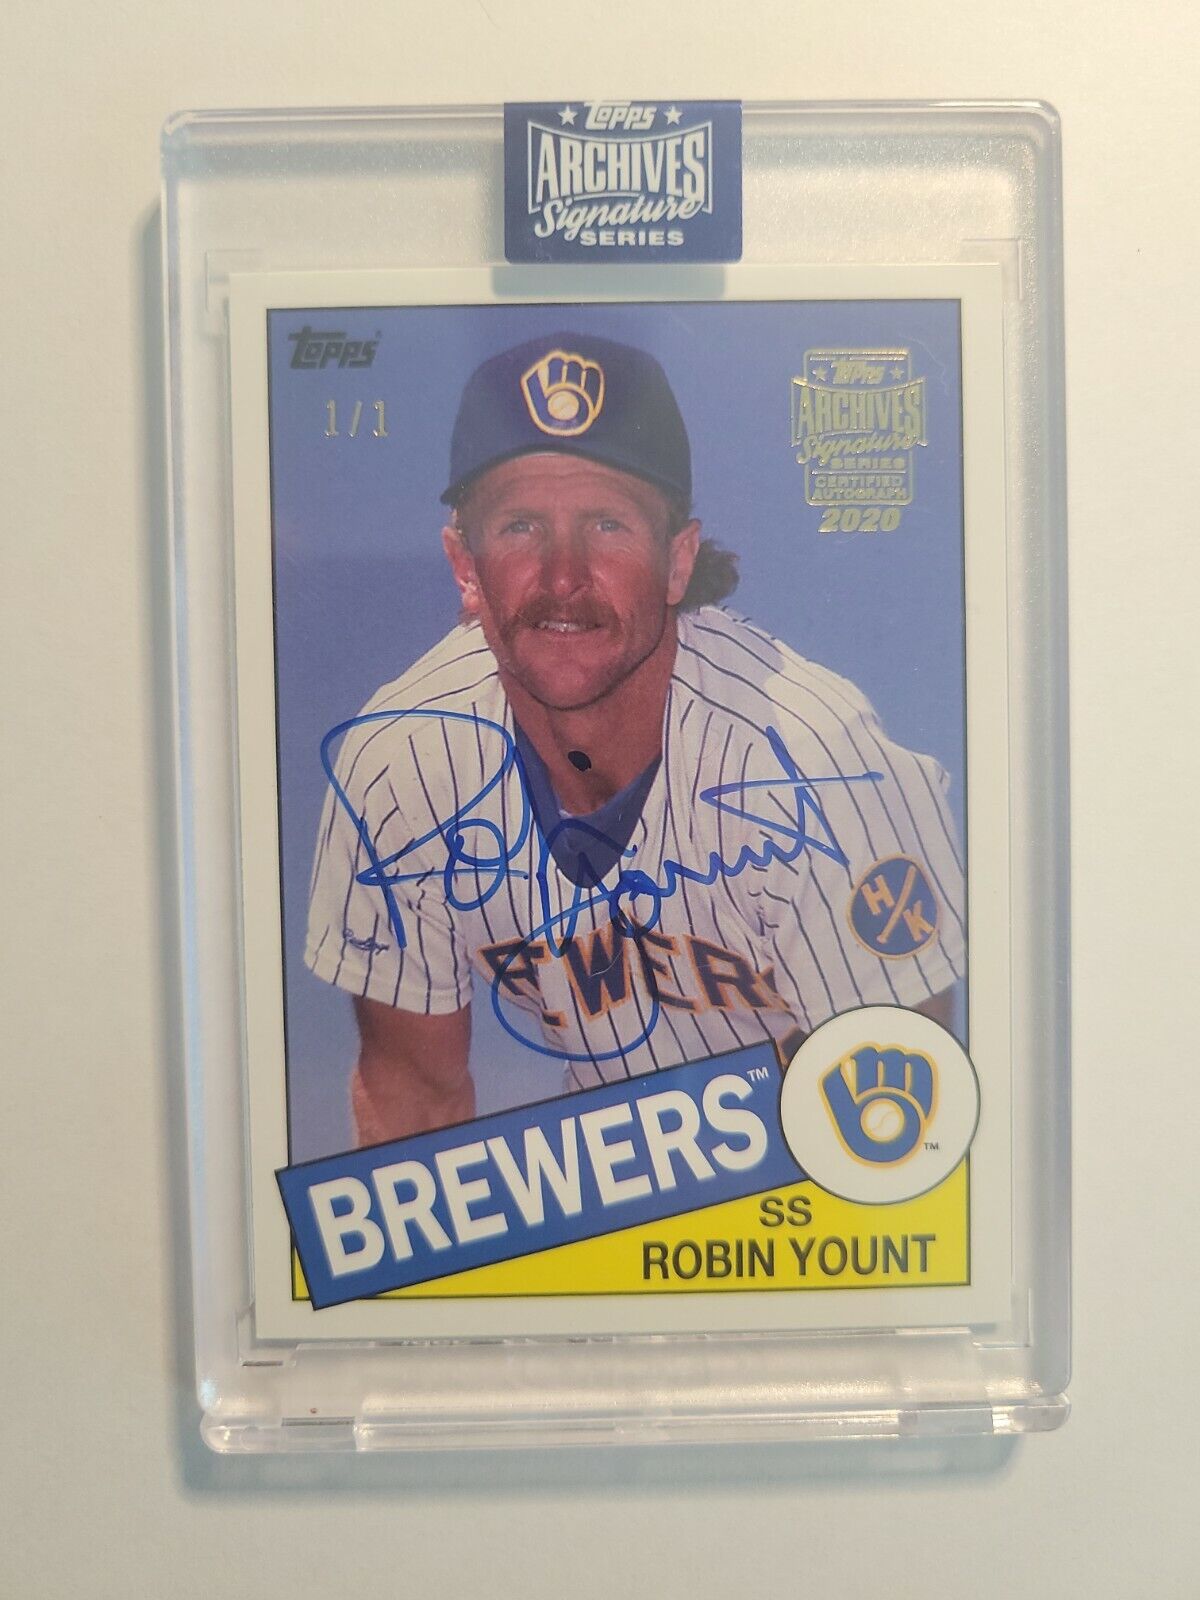 2020 Topps Archives Signature Series Robin Yount On Card Auto 1/1 Brewers (SS)